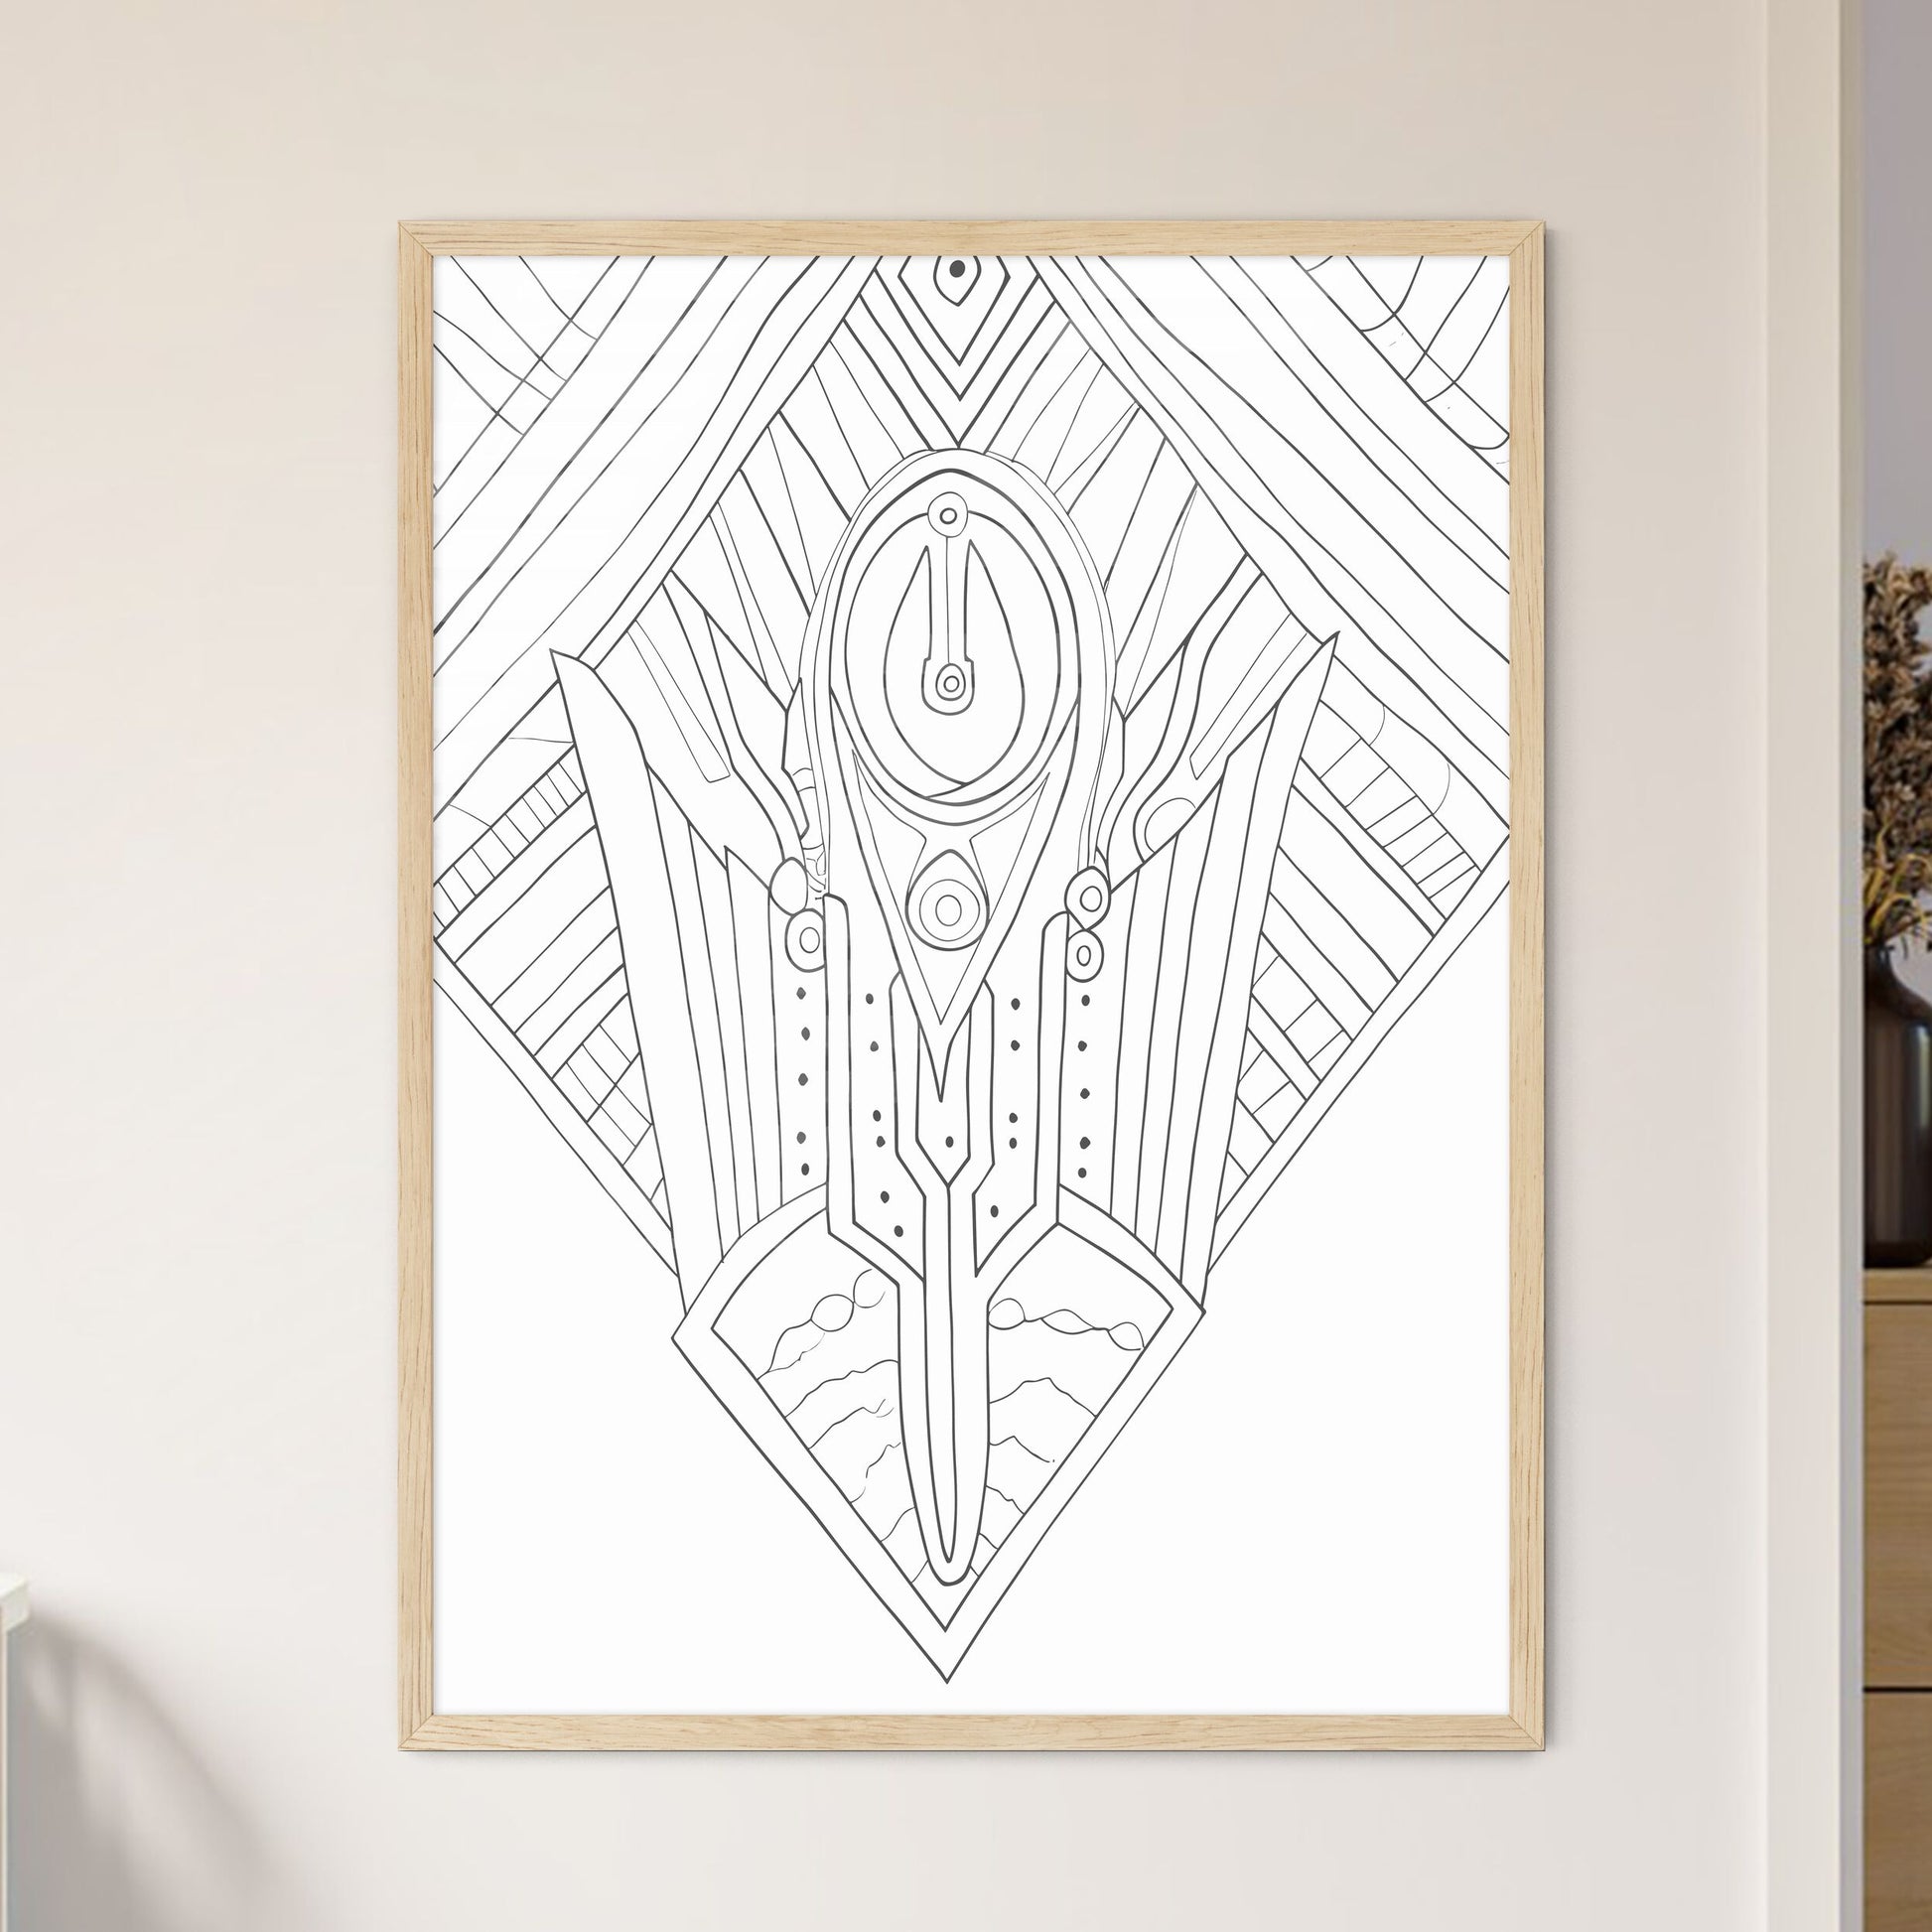 Hamsa Hands Poster - A Black And White Drawing Of A Design Default Title